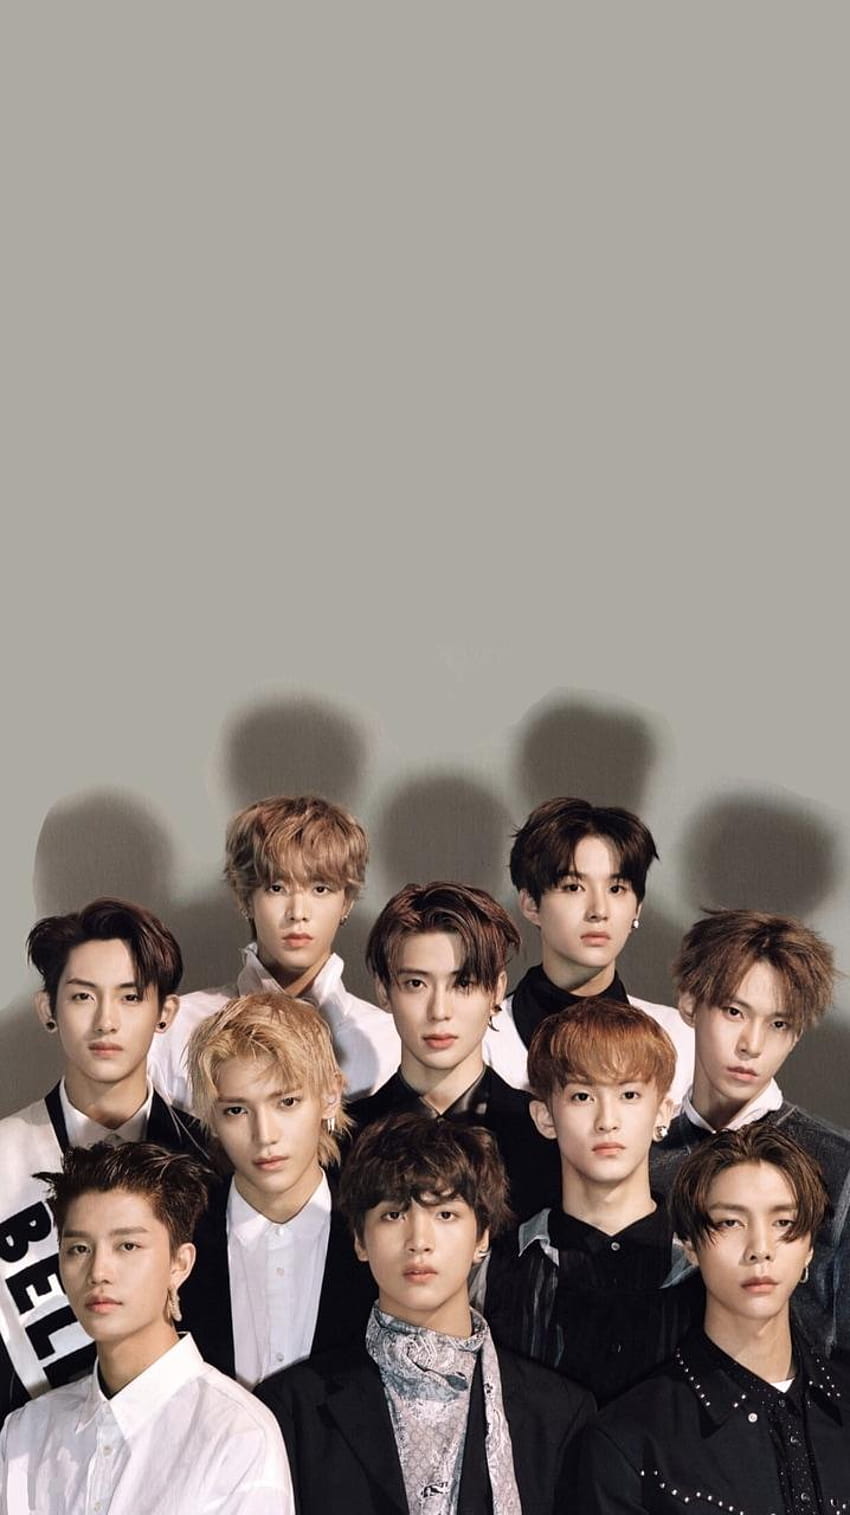 nct 127 regulate made by me :D it looks so blur, nct 2019 HD phone wallpaper